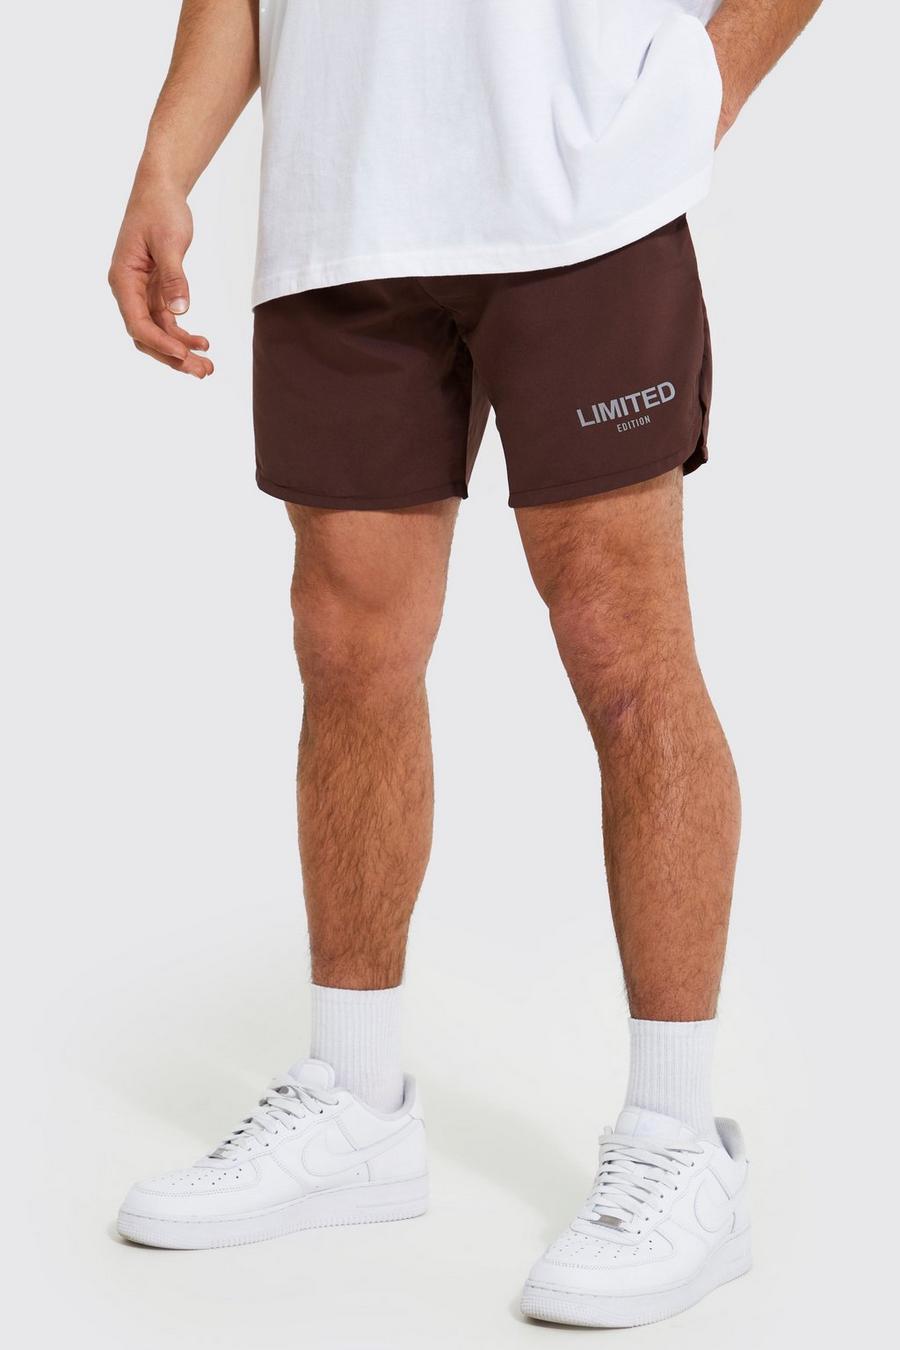 Chocolate marron Regular Fit Peached Shell Limited Shorts 